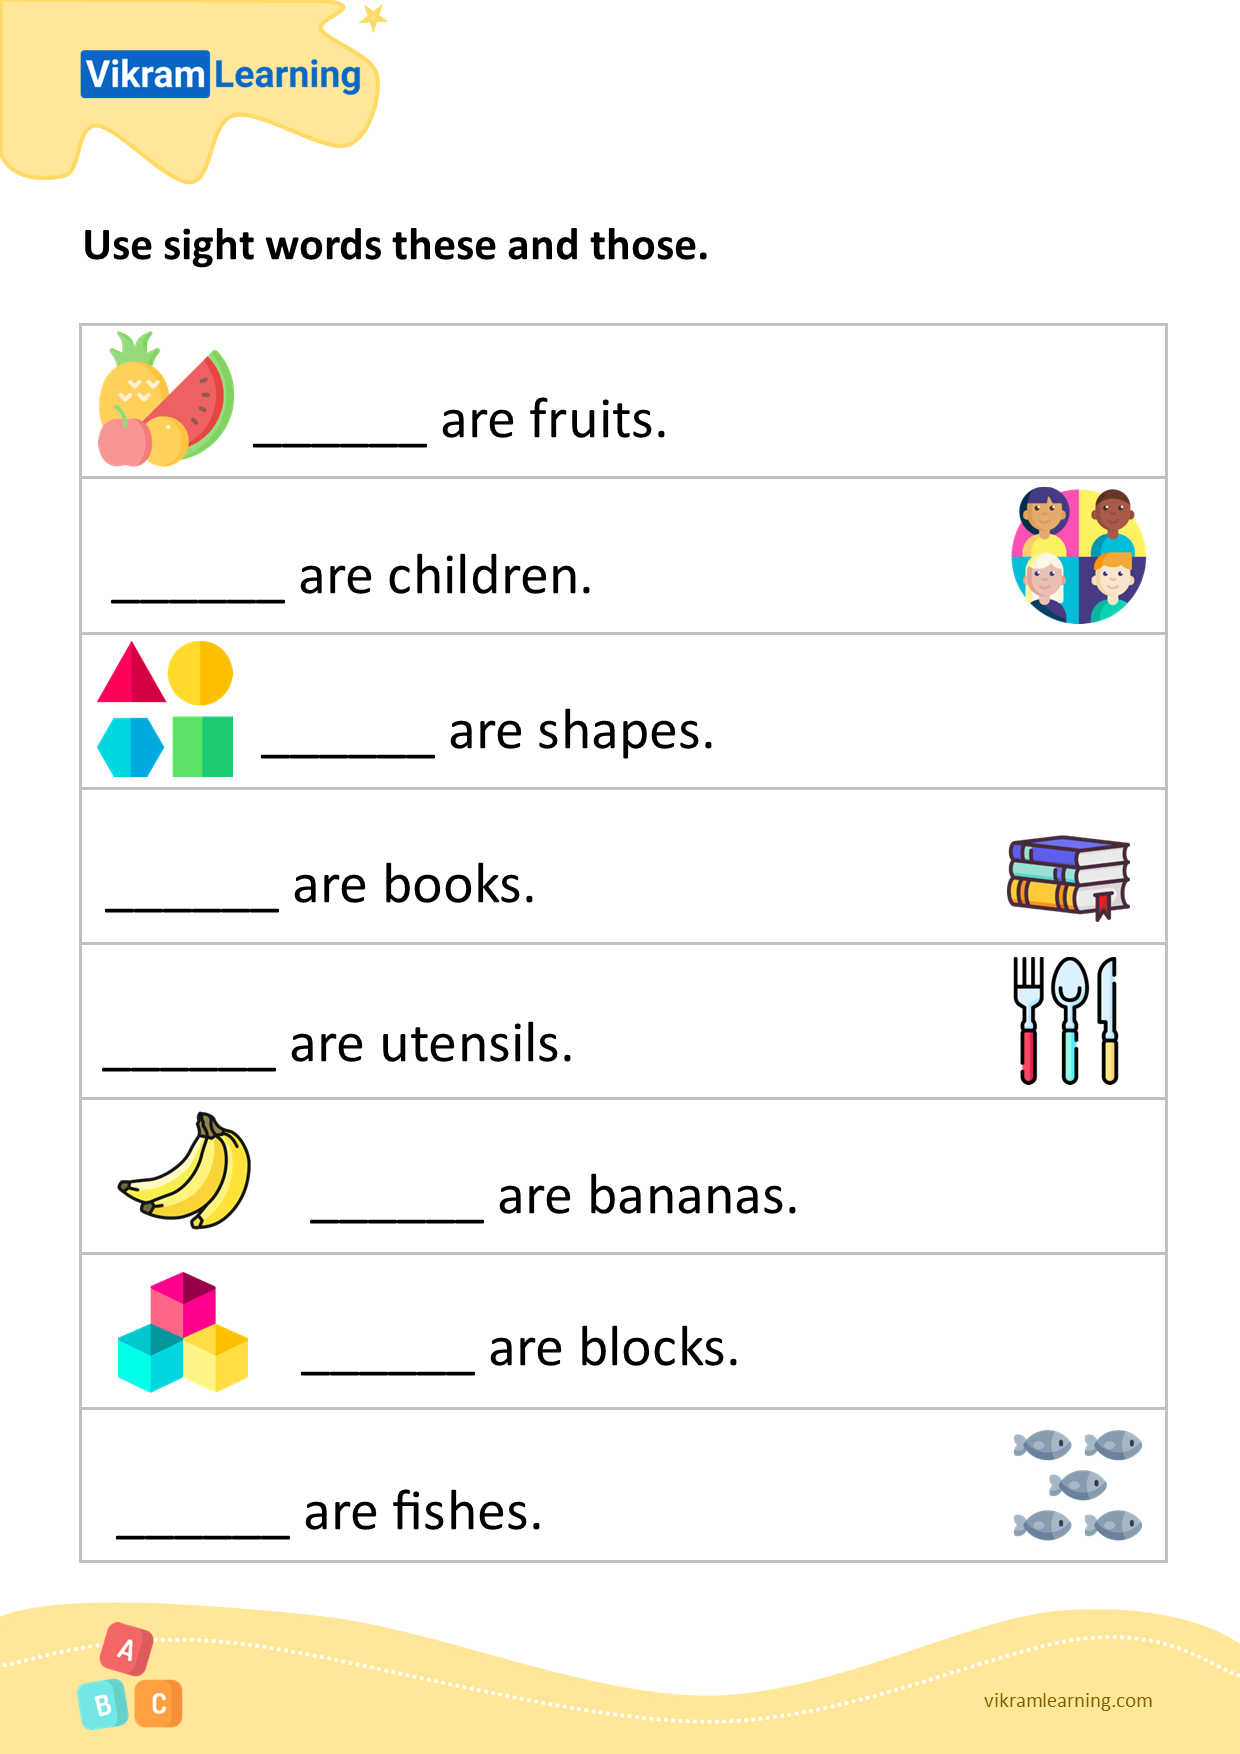 download-use-sight-words-these-and-those-worksheets-vikramlearning